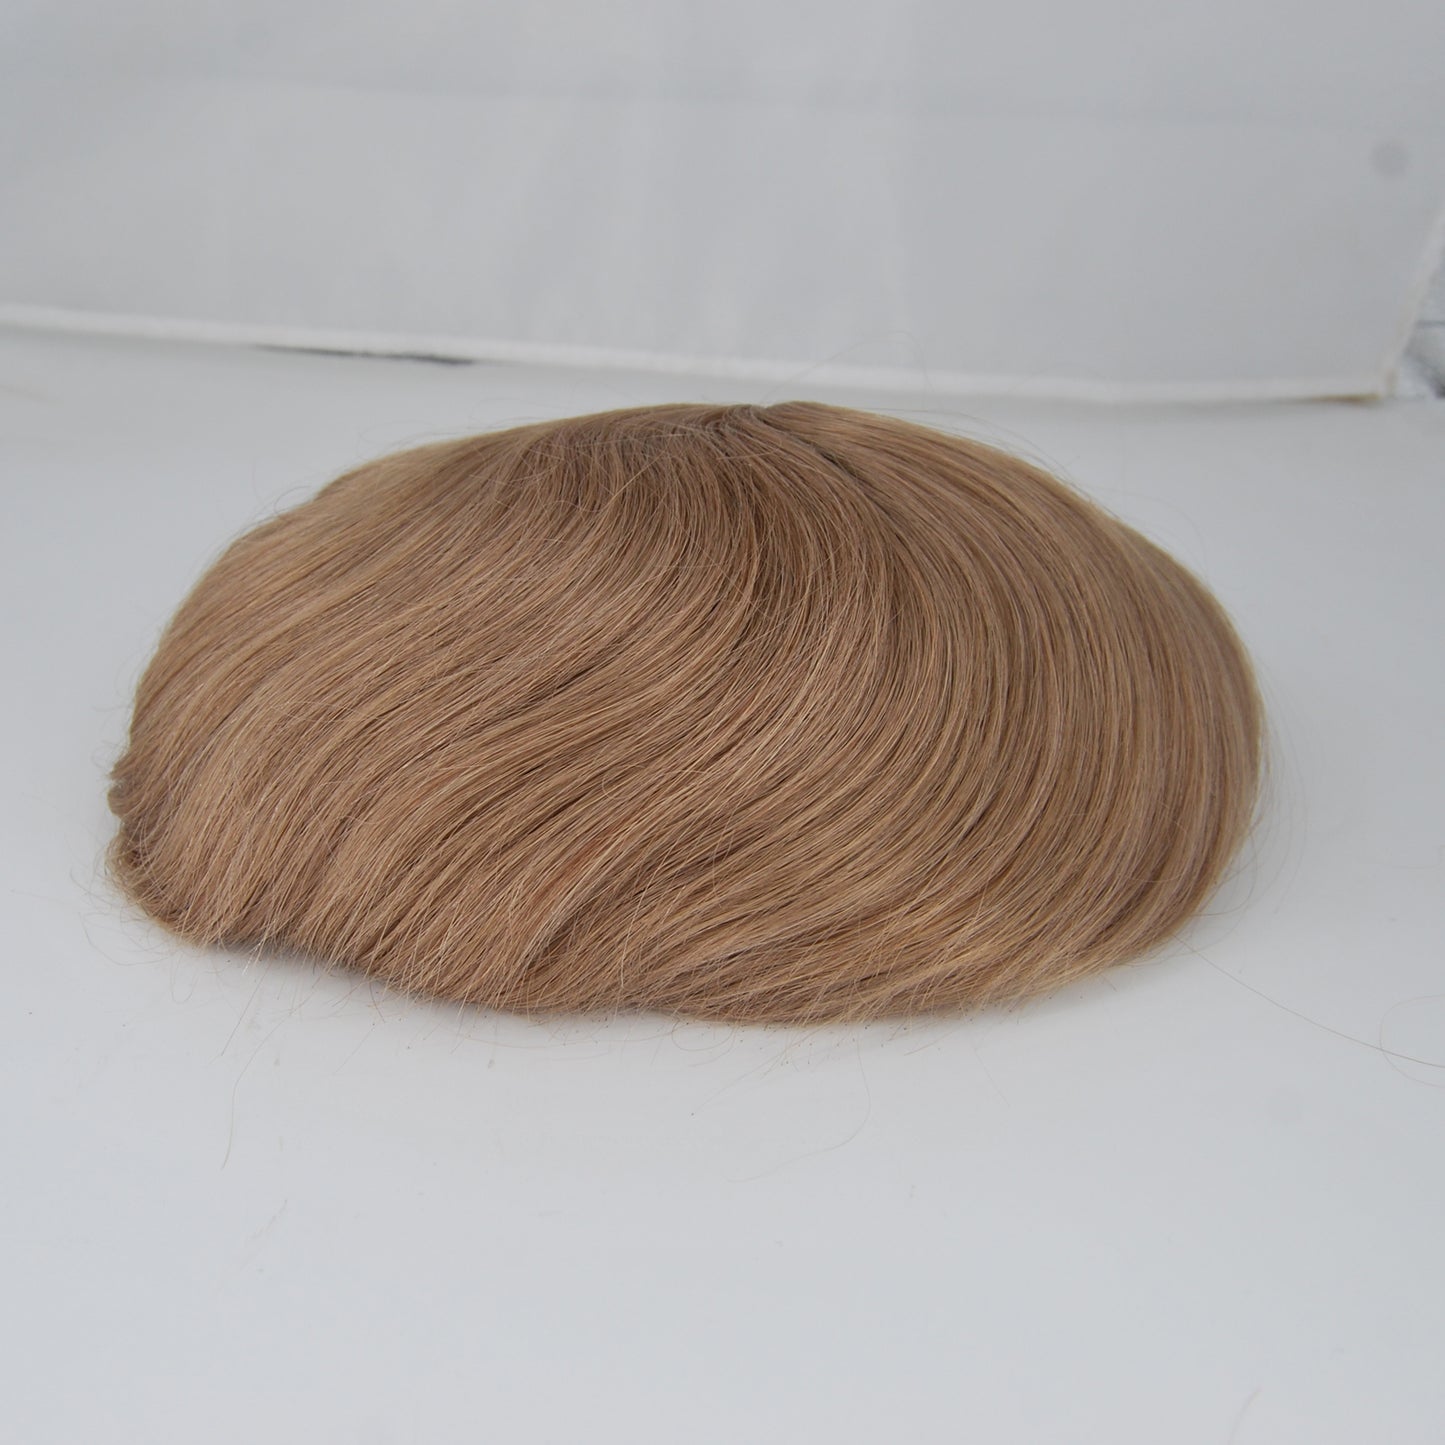 Clearance toupee #17 light blonde French lace with PU back and sides 10x7.5" human hair system